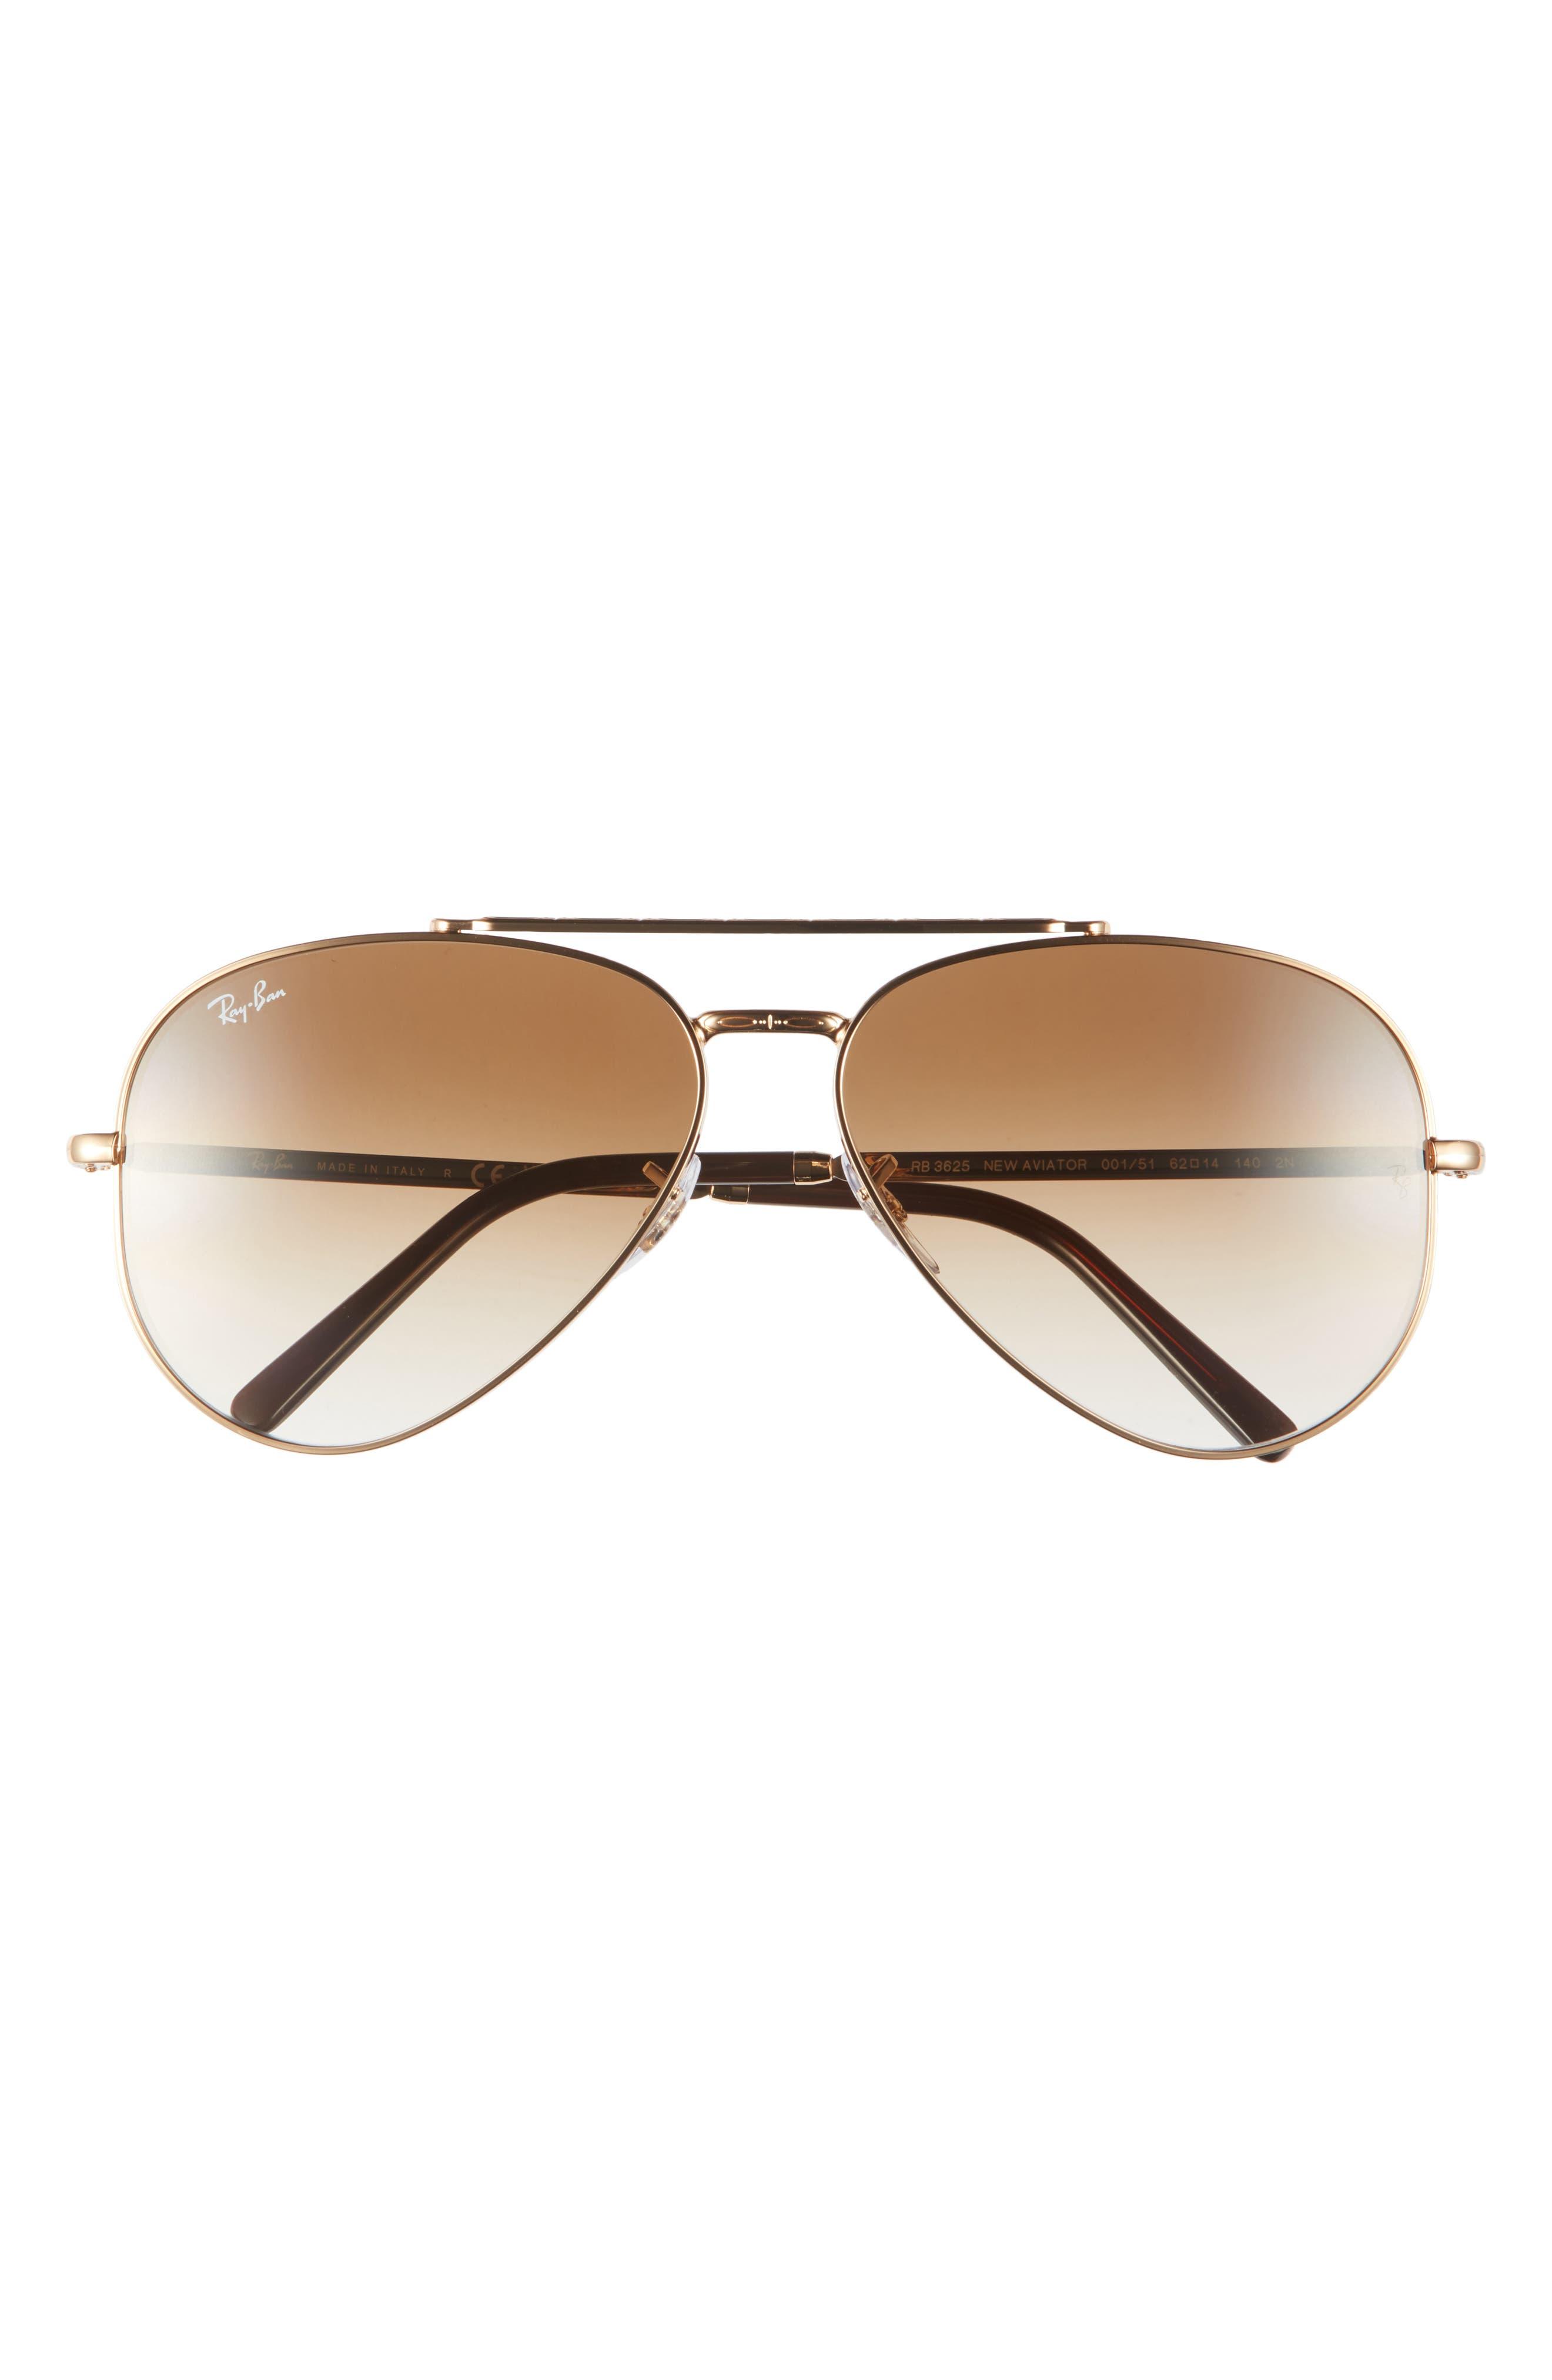 Ray-Ban New Aviator 58mm Gradient Pilot Sunglasses in Brown | Lyst